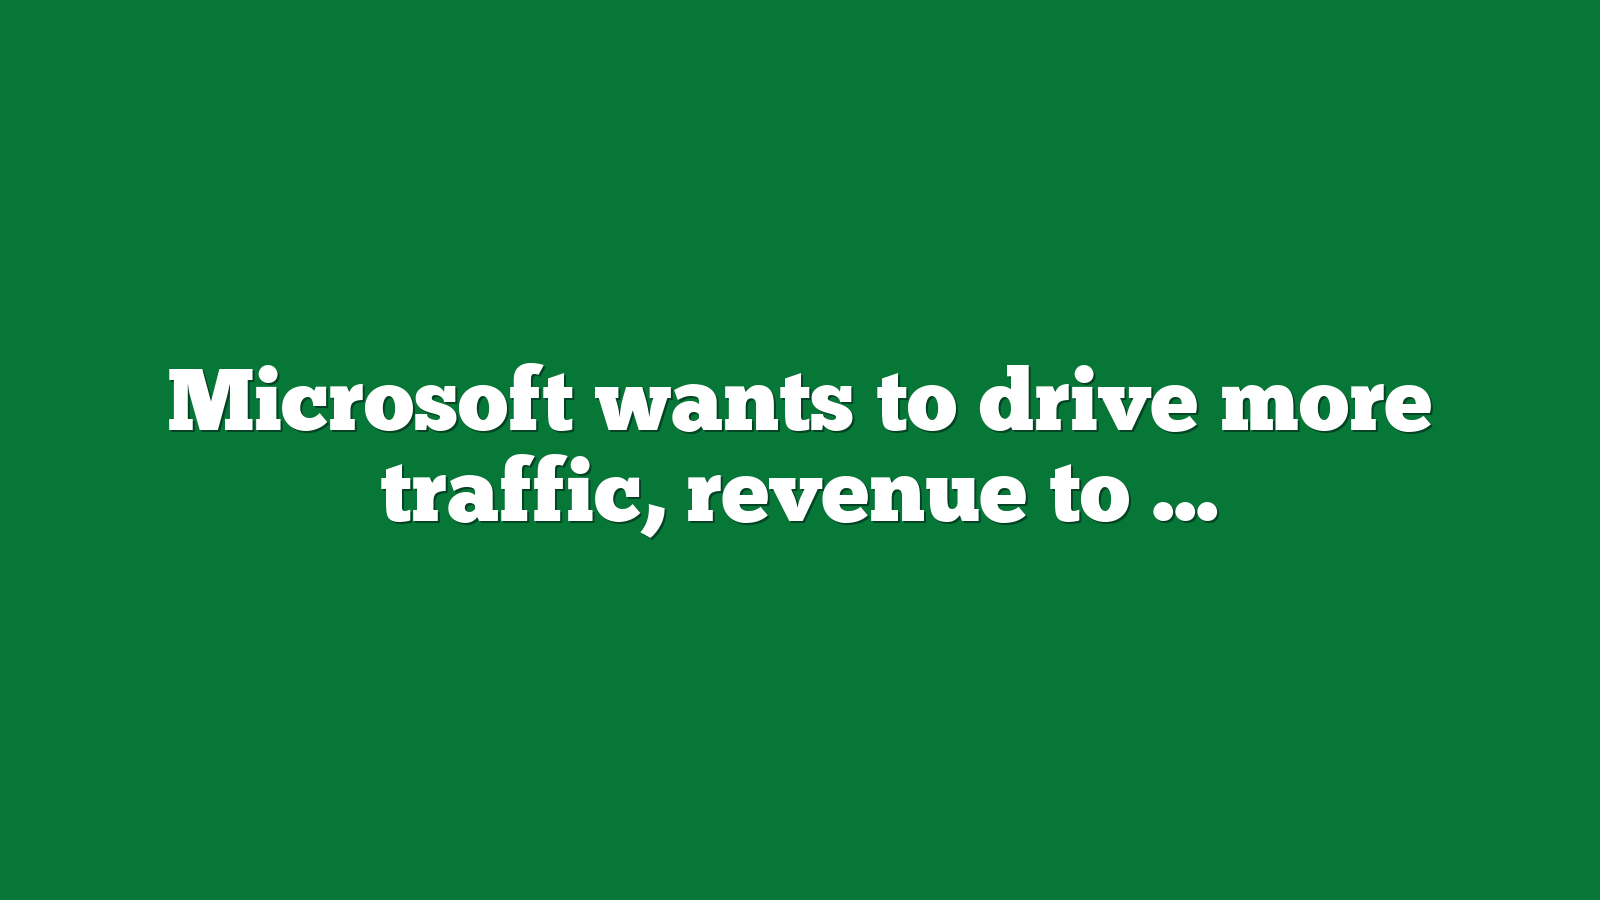 Microsoft wants to drive more traffic revenue to publishers